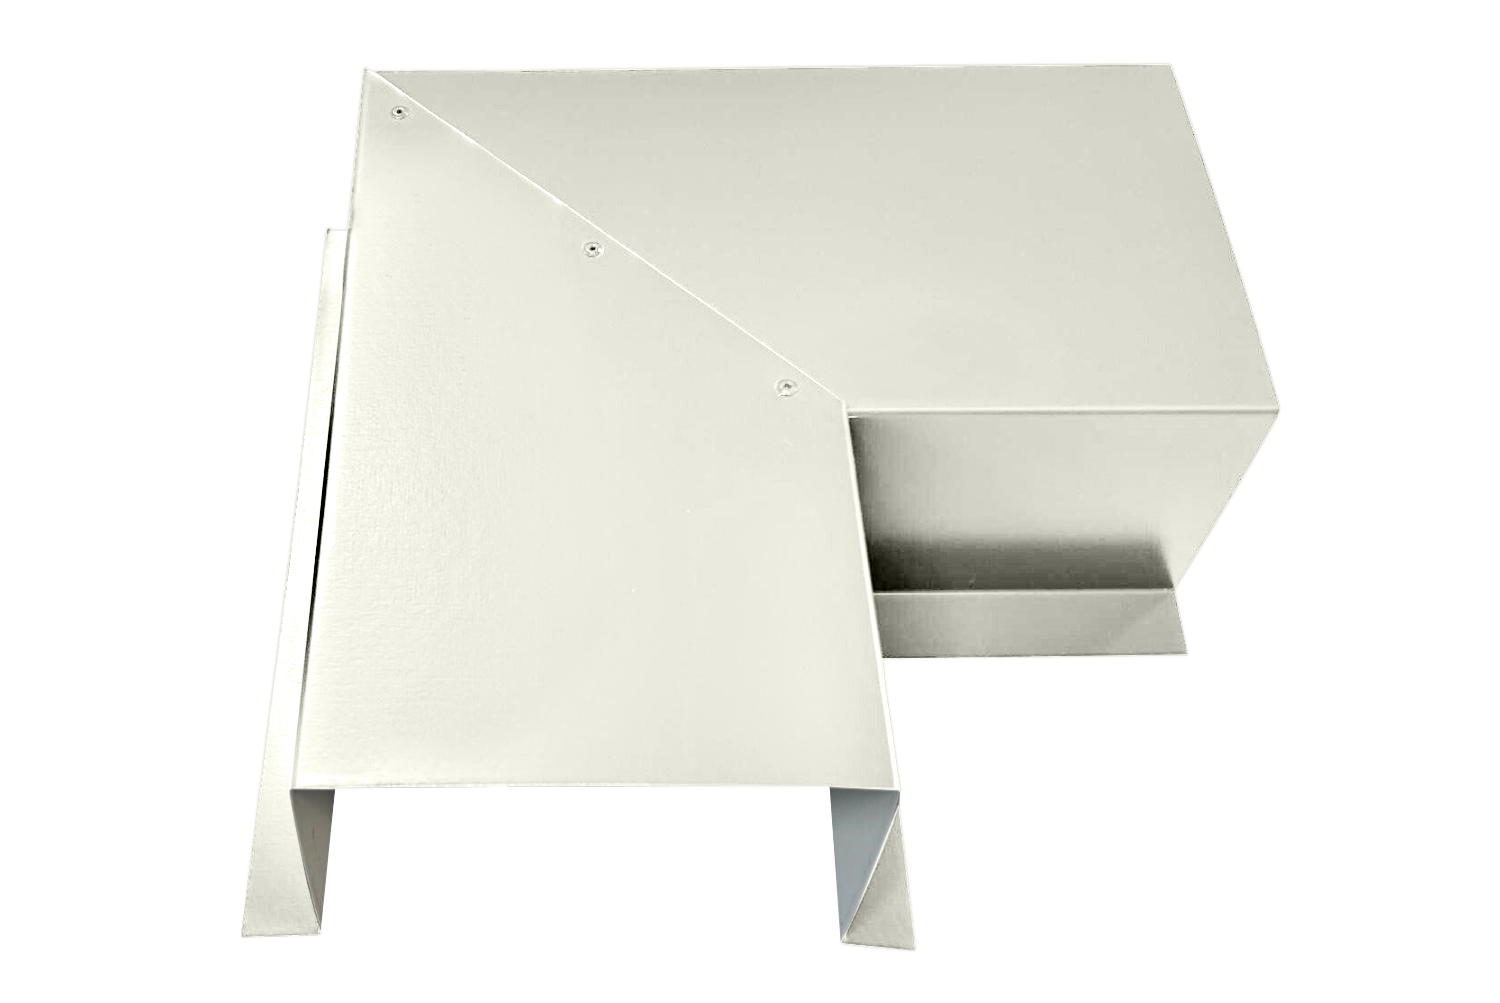 A white, angular metal duct elbow is shown on a neutral background. Crafted from premium quality 24 gauge steel, the Perma Cover Commercial Series - 24 Gauge Line Set Cover Side Turning Elbows - Premium Quality boasts a complex design with multiple sections and bends, featuring sharp edges and clean lines. It appears to be an HVAC component used for directing airflow, ensuring easy installation.